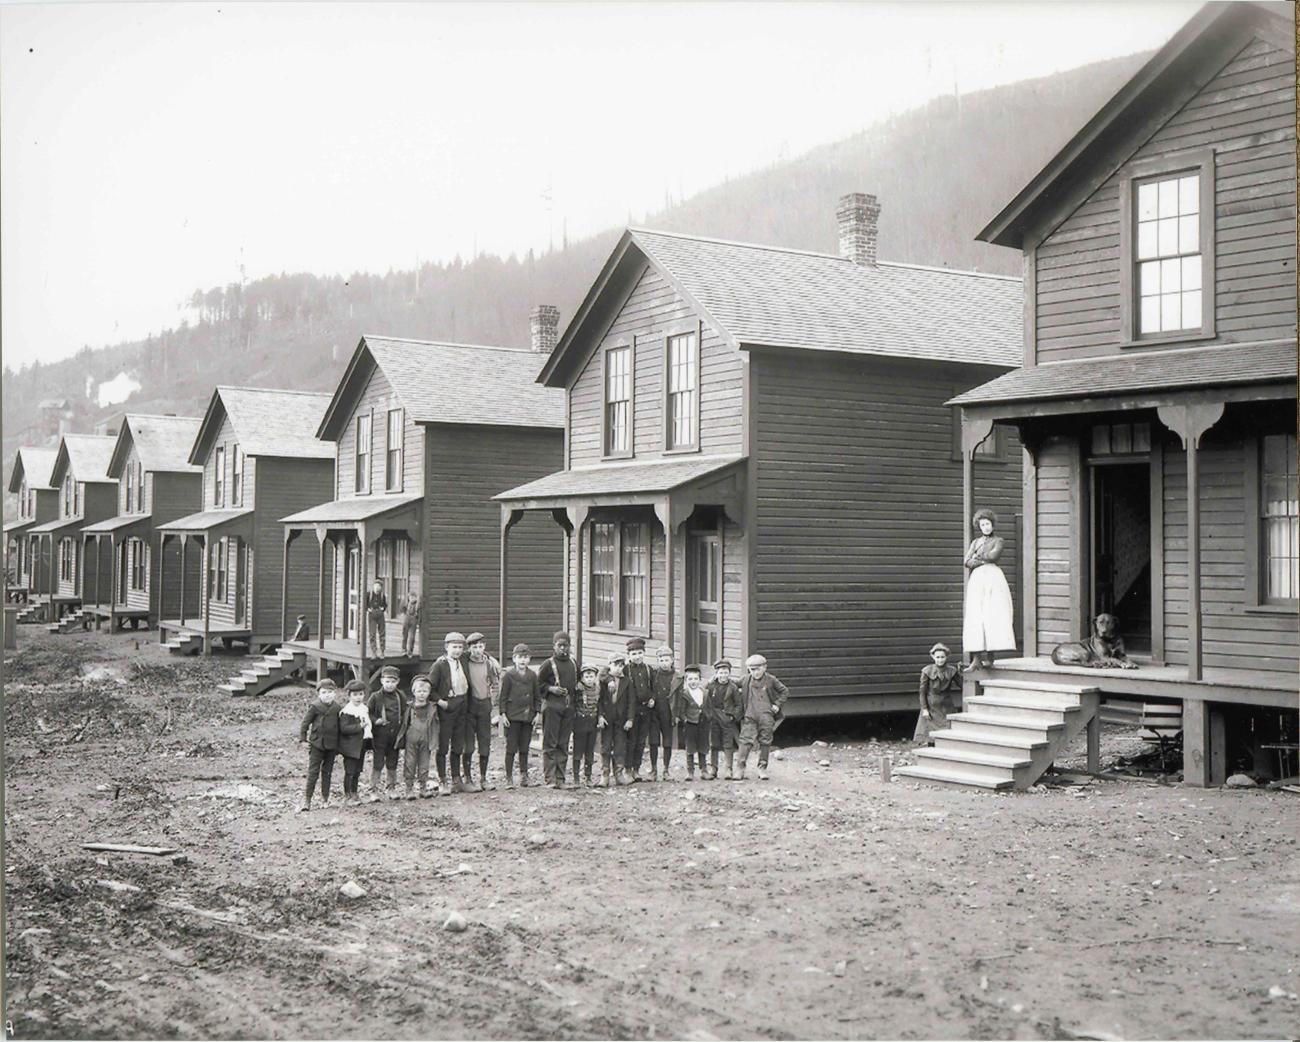 Historic photo of the Franklin Townsite shoing a group of people standing in front of homes